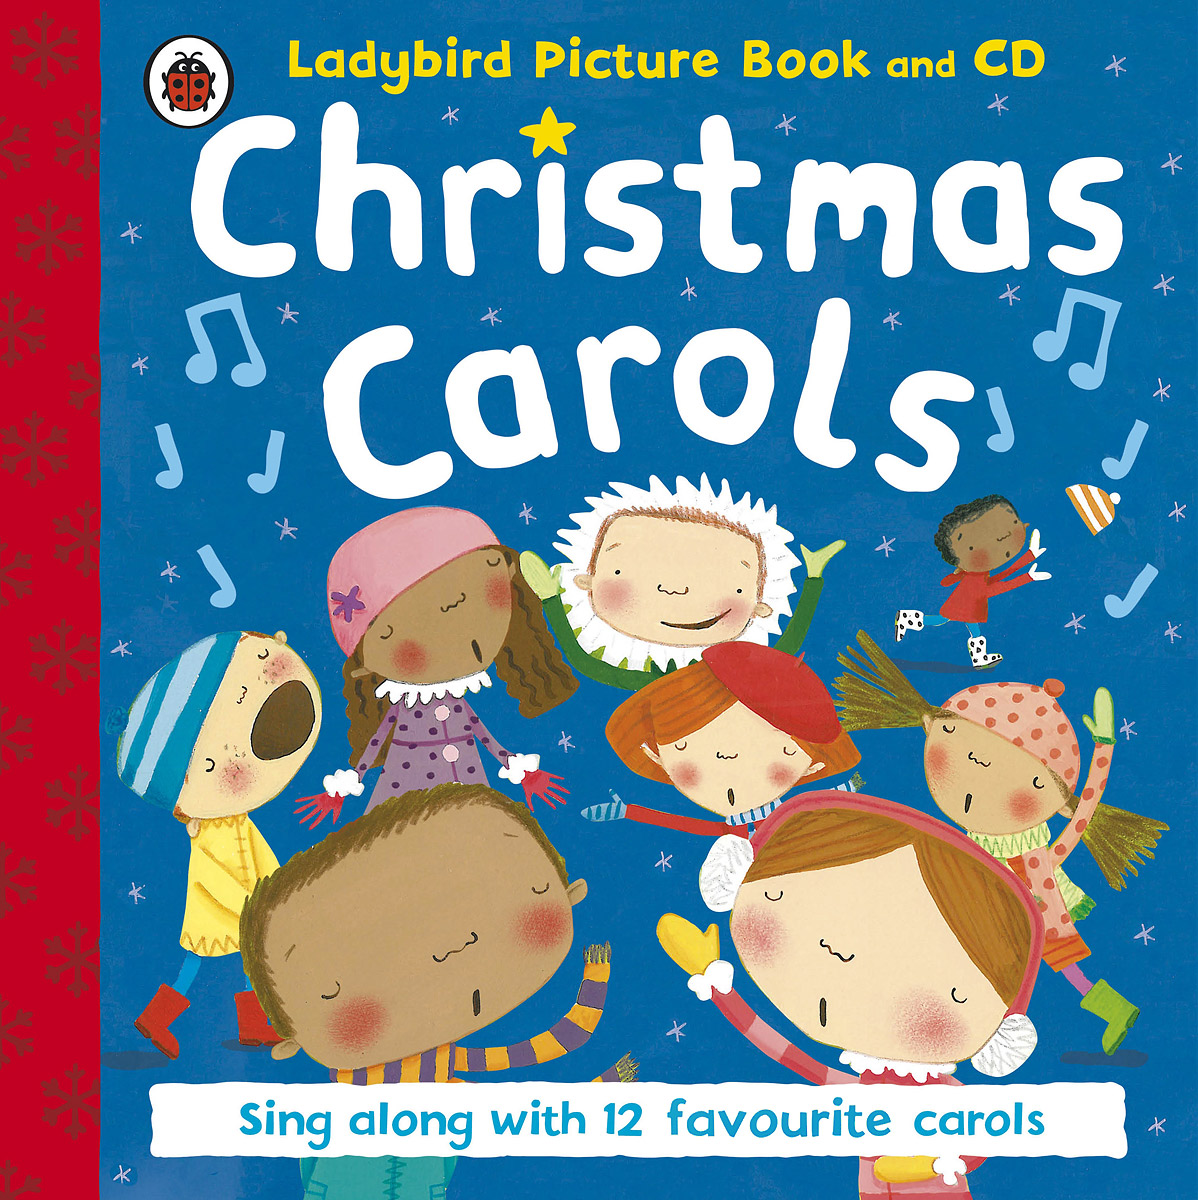 Christmas Carols (+ CD)12296407This classic collection of twelve best-loved Christmas carols is perfect for festive family fun. Its so easy to join in - simply listen to the music on the attached CD and sing along with the words in the colourful book. Ladybirds Christmas Carols book and CD contains all your traditional Christmas carol favourites such as Away in a Manger, Once in Royal Davids City, The First Noel, Hark the Herald, Silent Night, We Three Kings and more! The perfect gift for giving both adults and children the Christmas spirit!